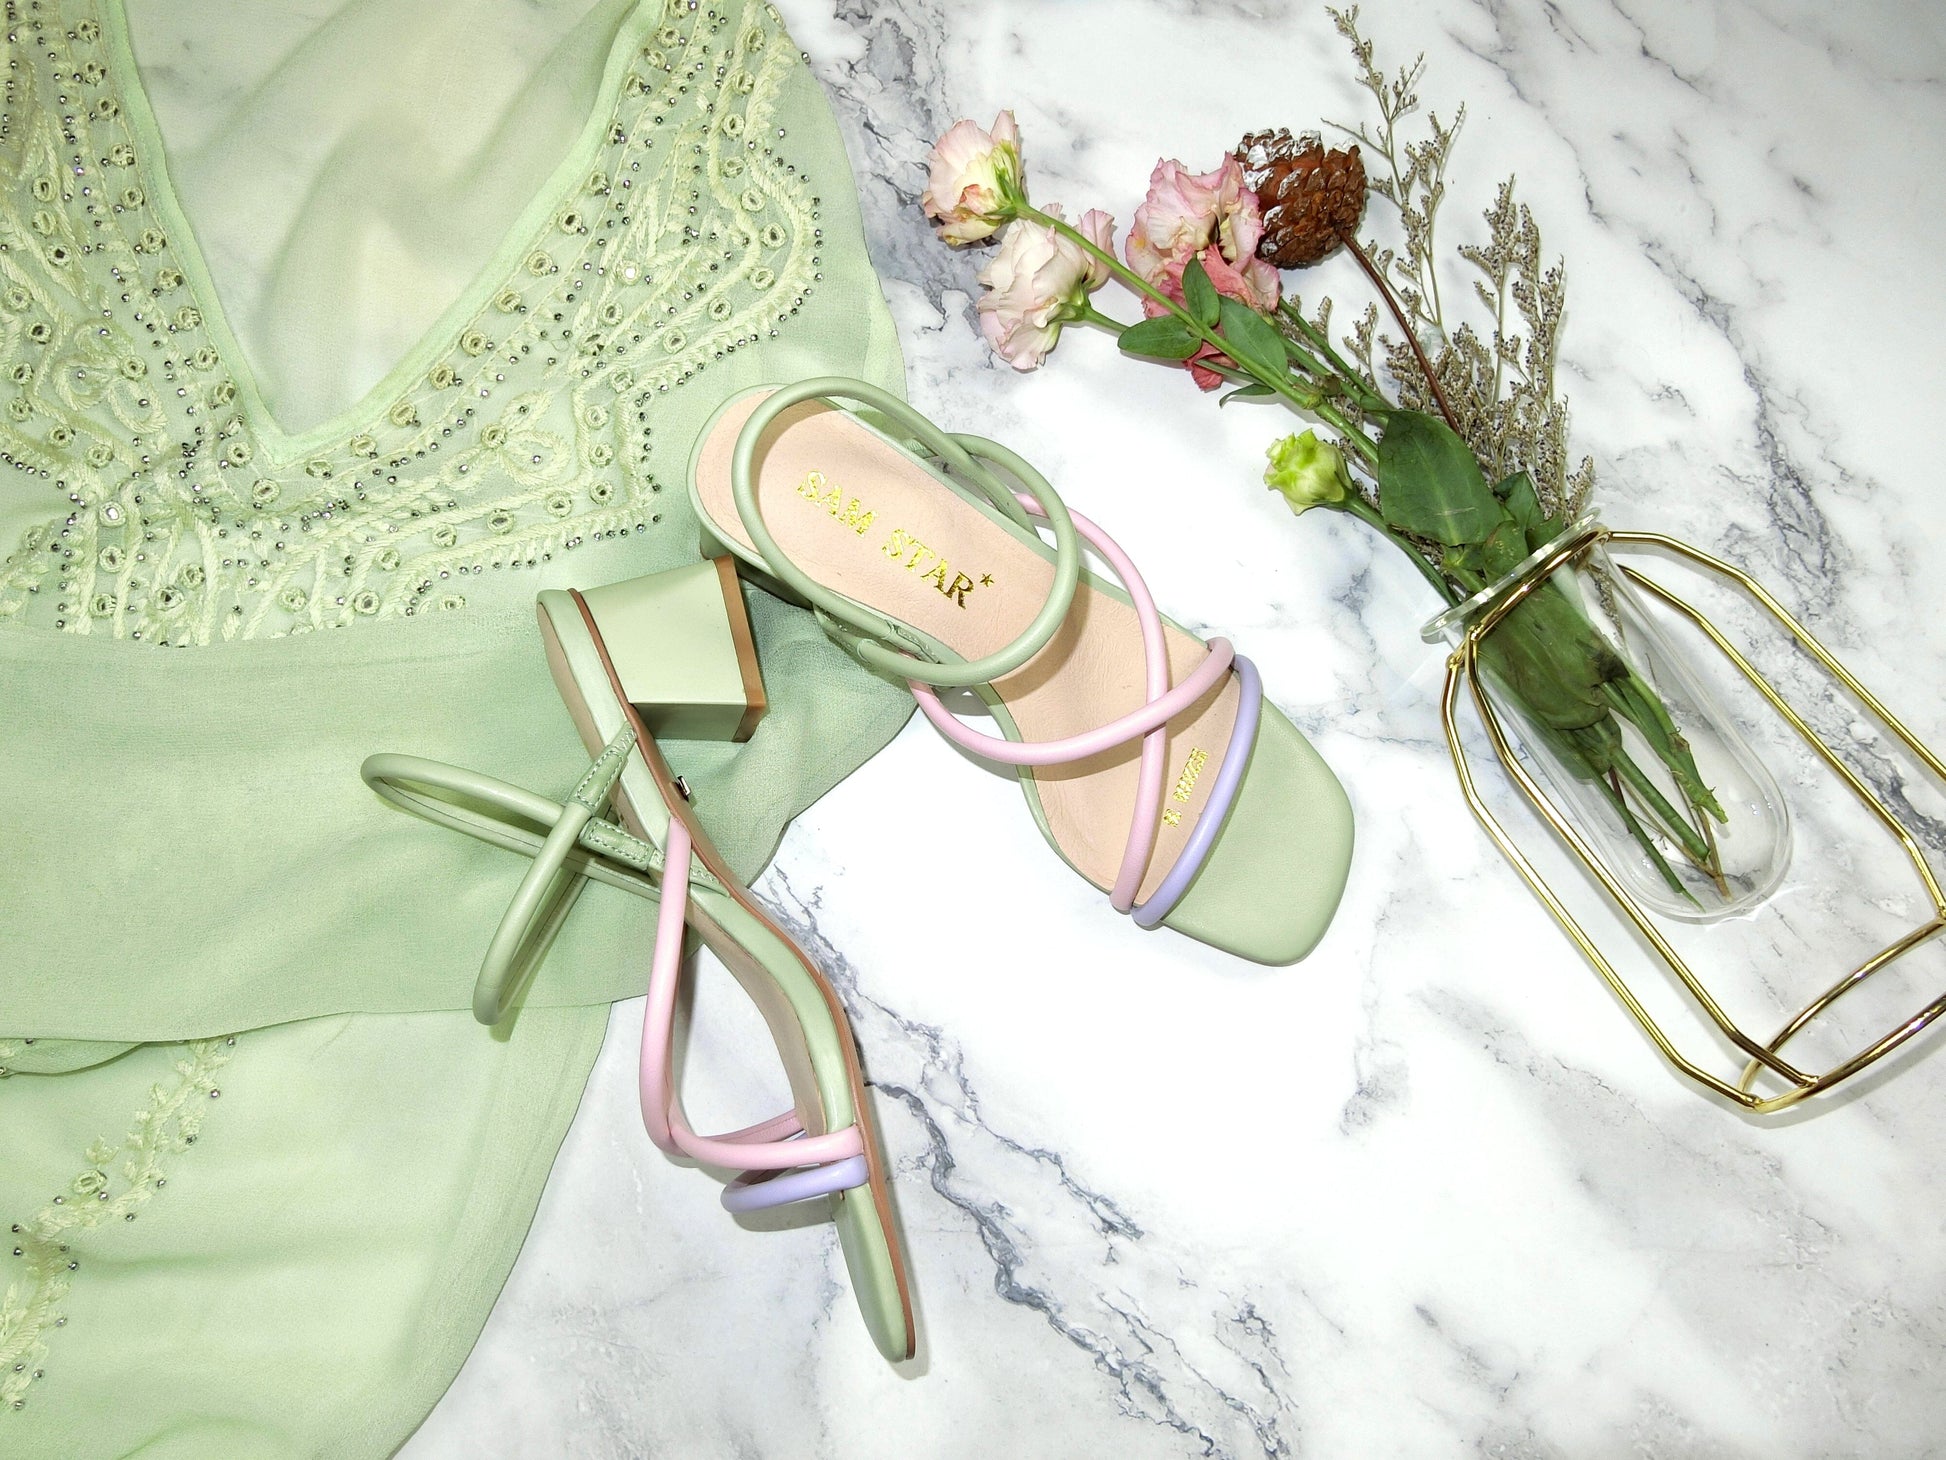 SS22007 Genuine leather strappy block heel sandals in mint, pink and lilac sandals Sam Star Shoes Mint.PInk.Lilac 38/5 